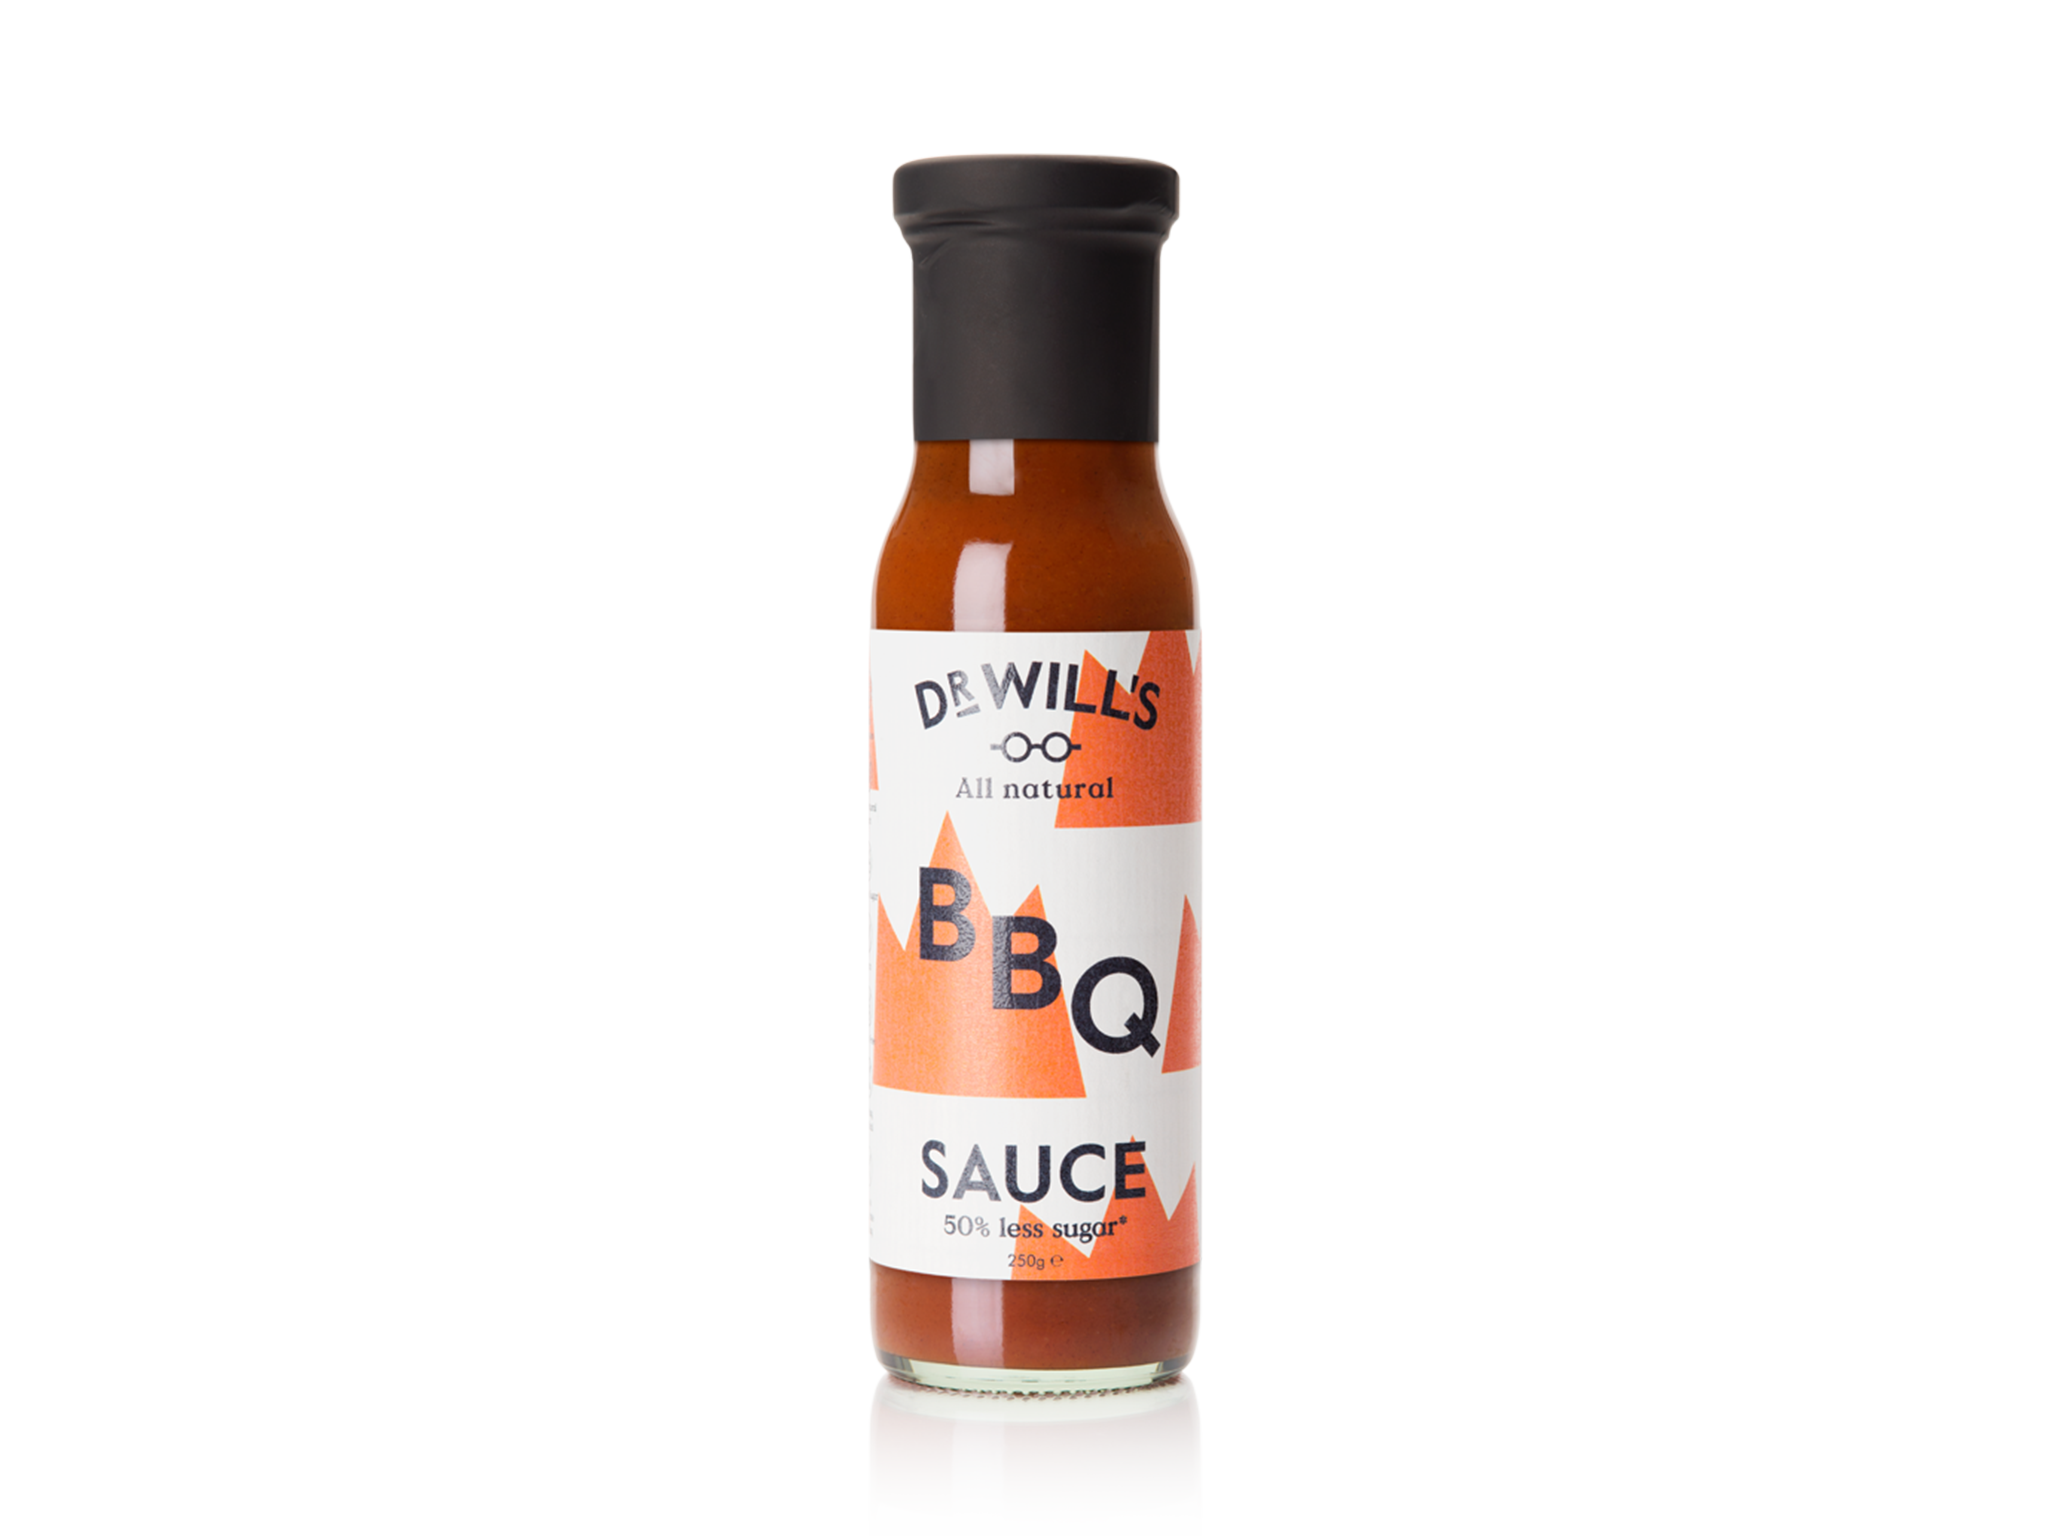 Dr Will’s BBQ sauce is both smoky and sweet – the perfect combination for grilling (Mi